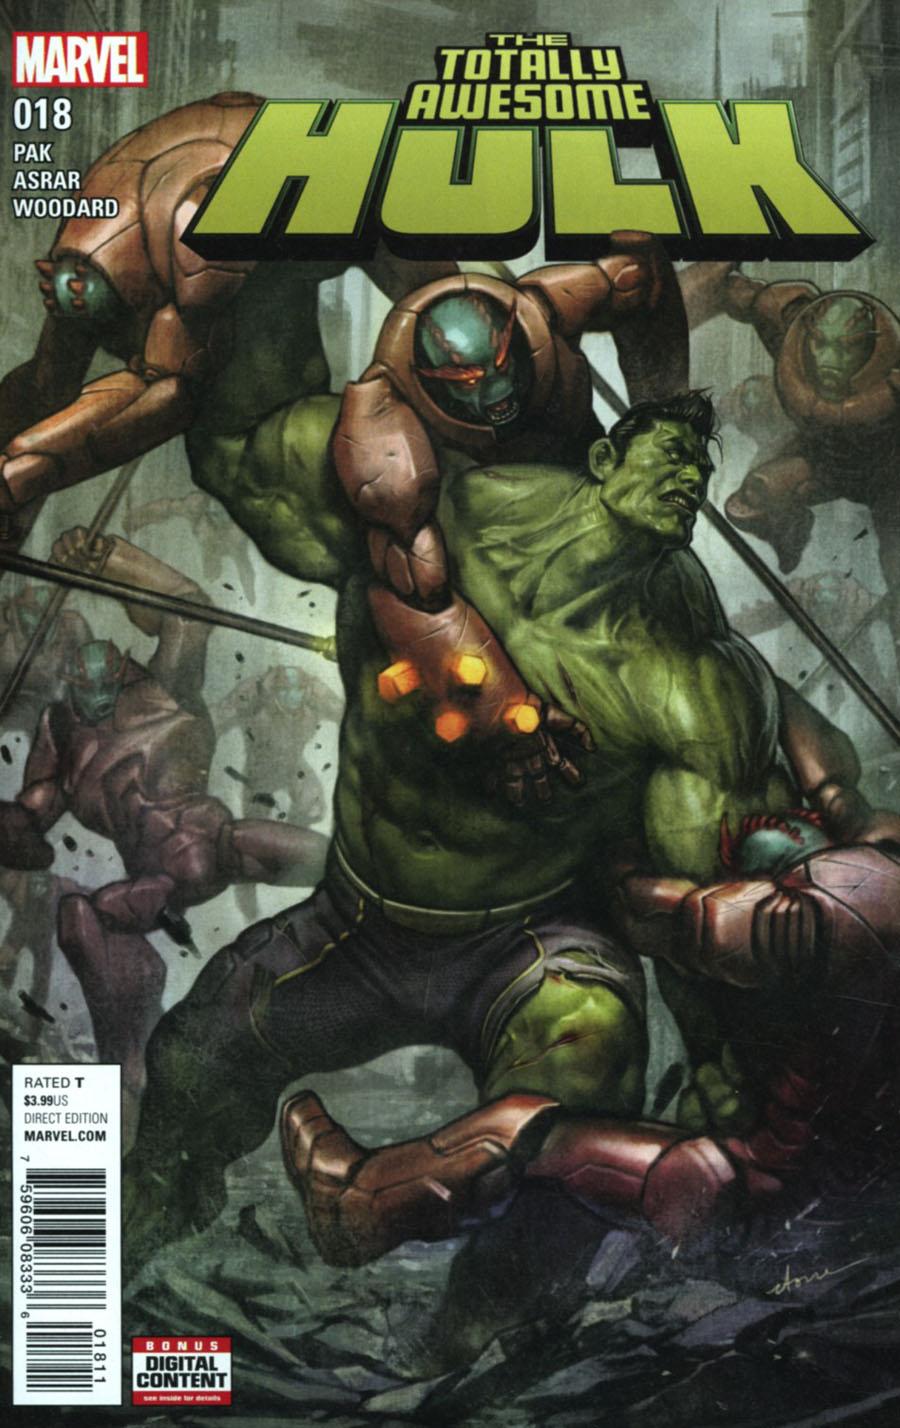 Totally Awesome Hulk Vol. 1 #18